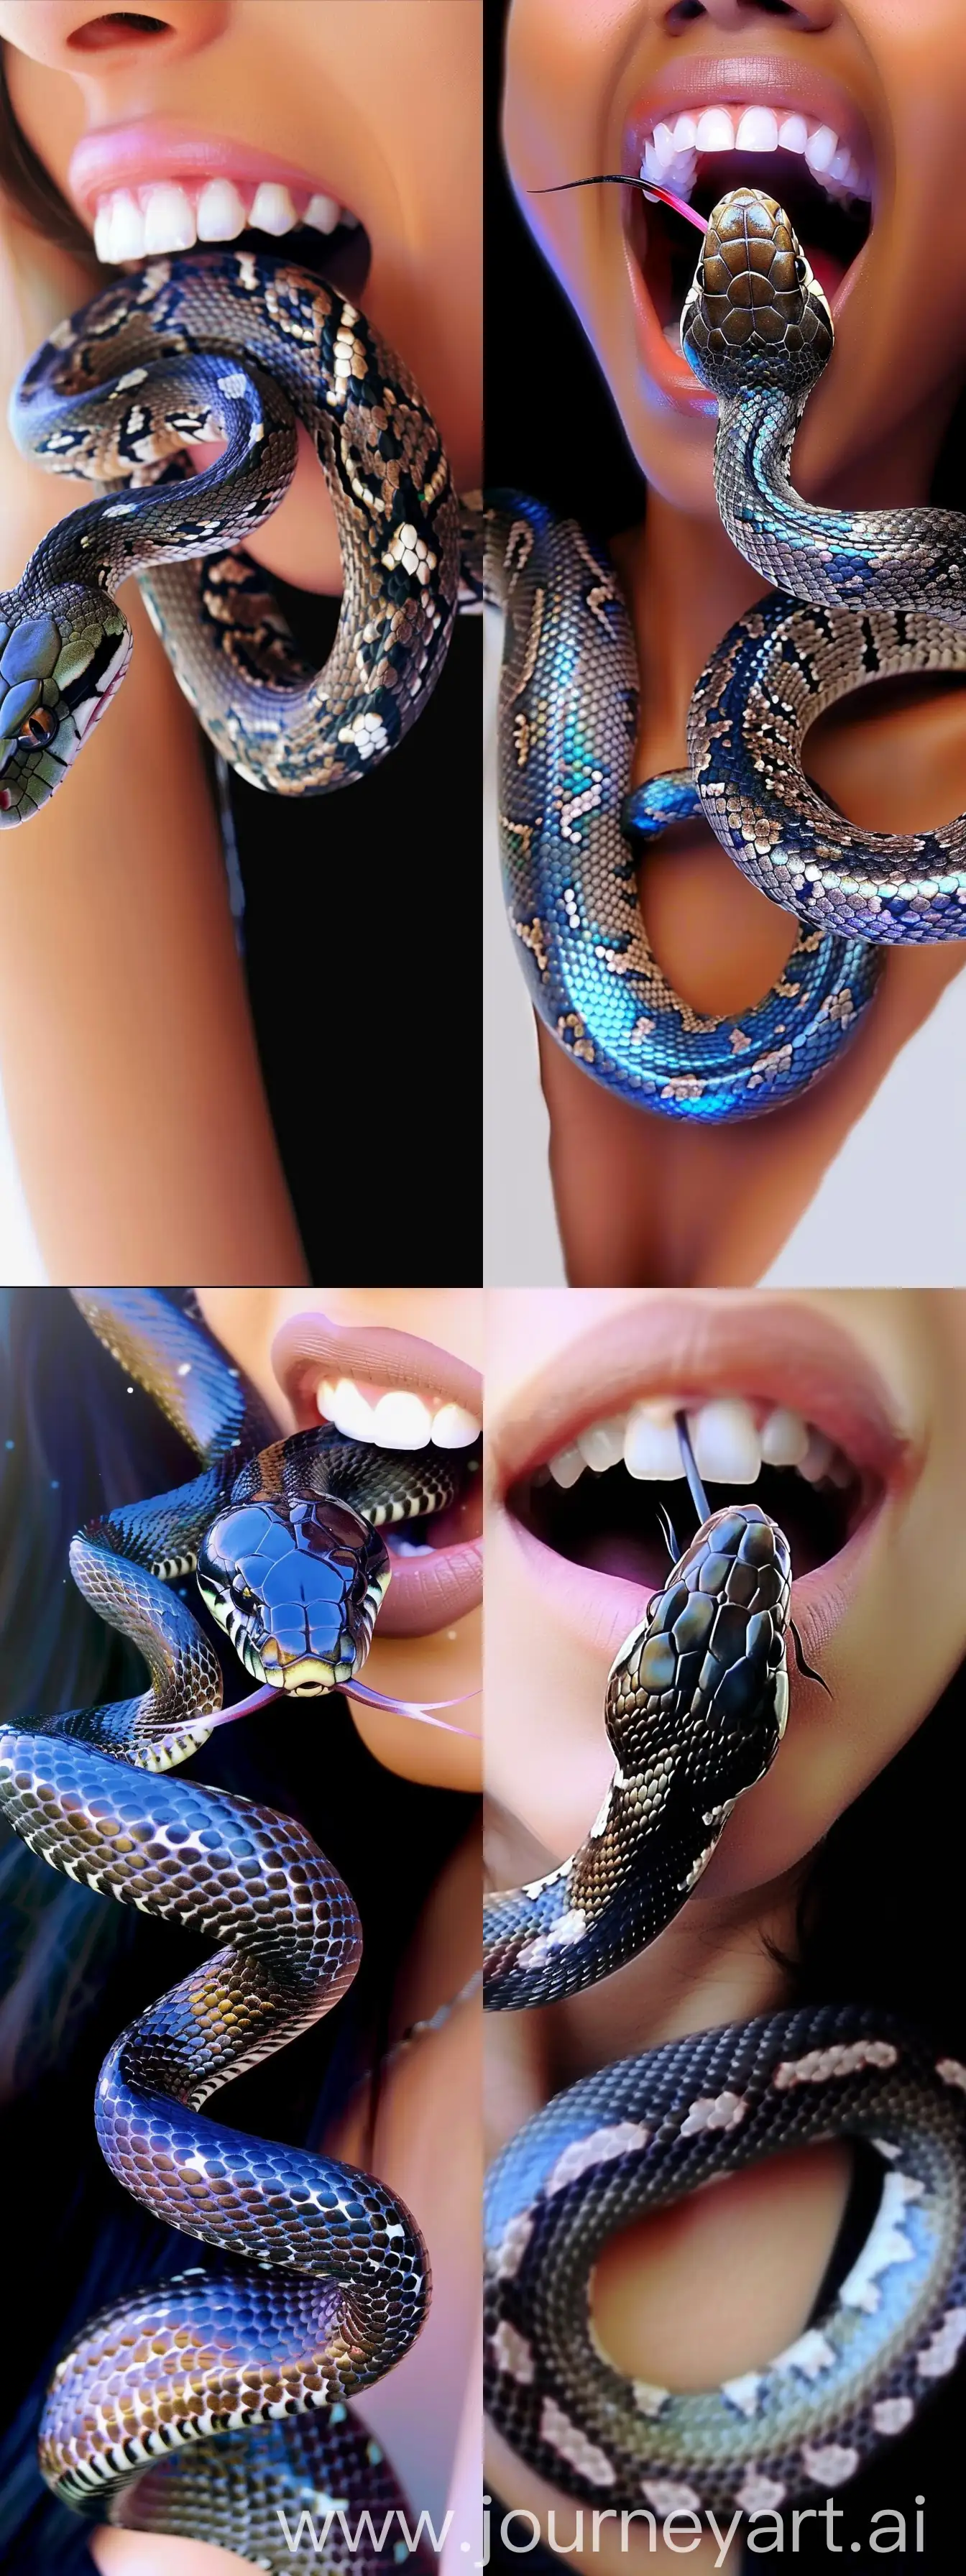 Woman-with-Snake-Emerging-from-Lips-in-Studio